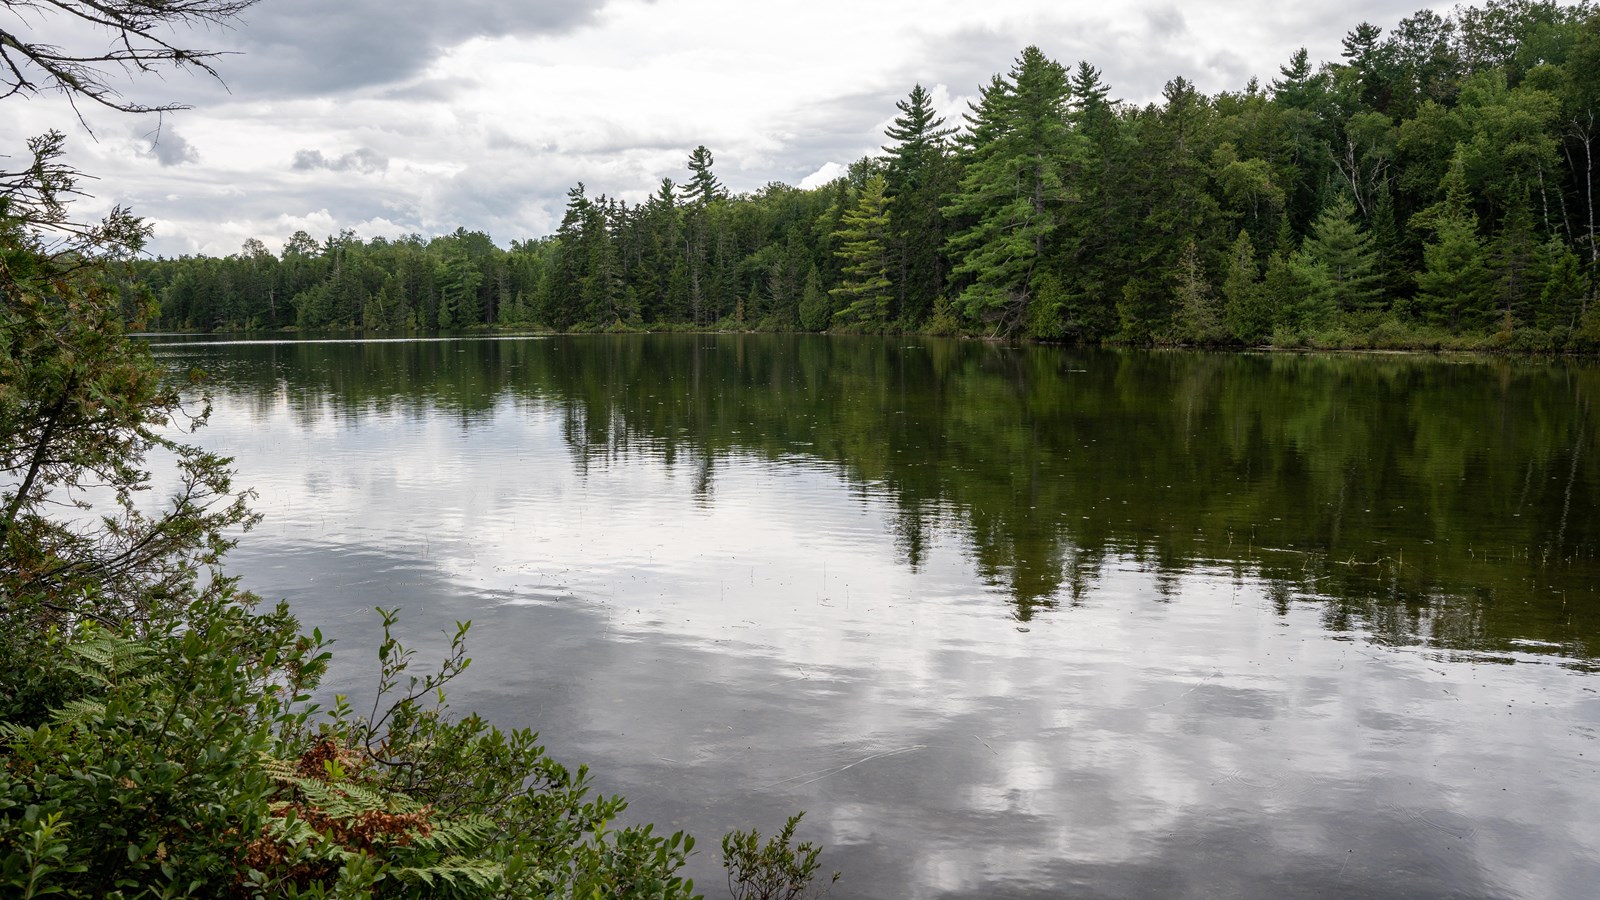 A large still pond reflects surrounding trees and cloudy skies.